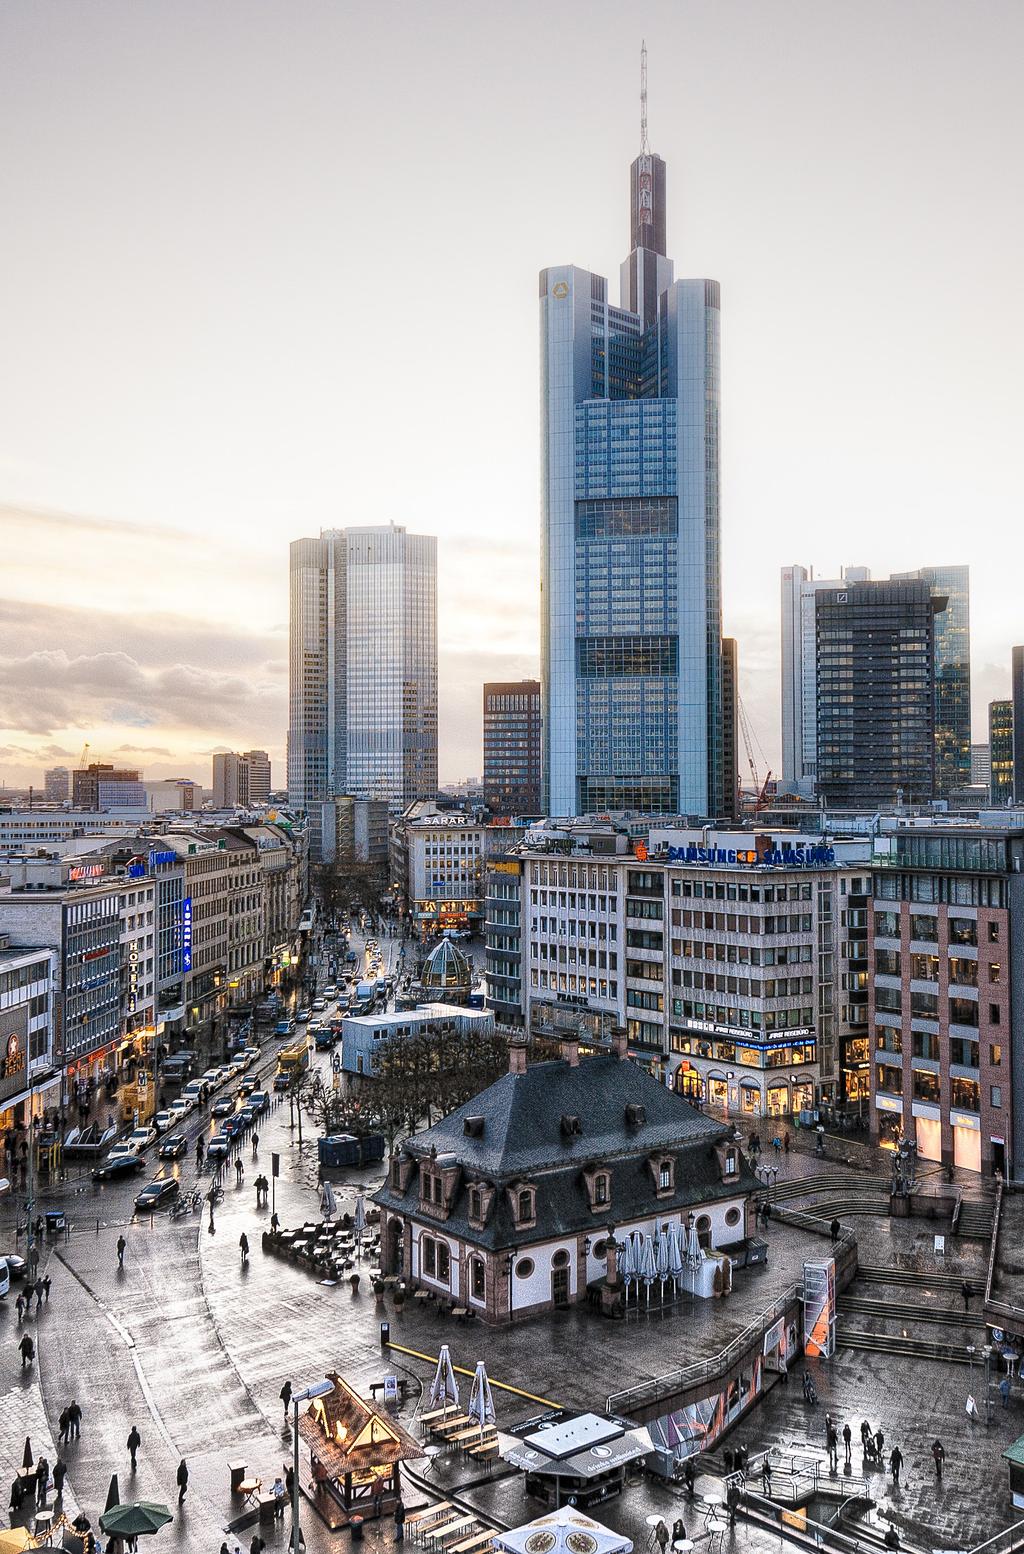 Frankfurt prides itself on being the largest city in the German state of Hesse and also one of the largest financial centres in Europe.